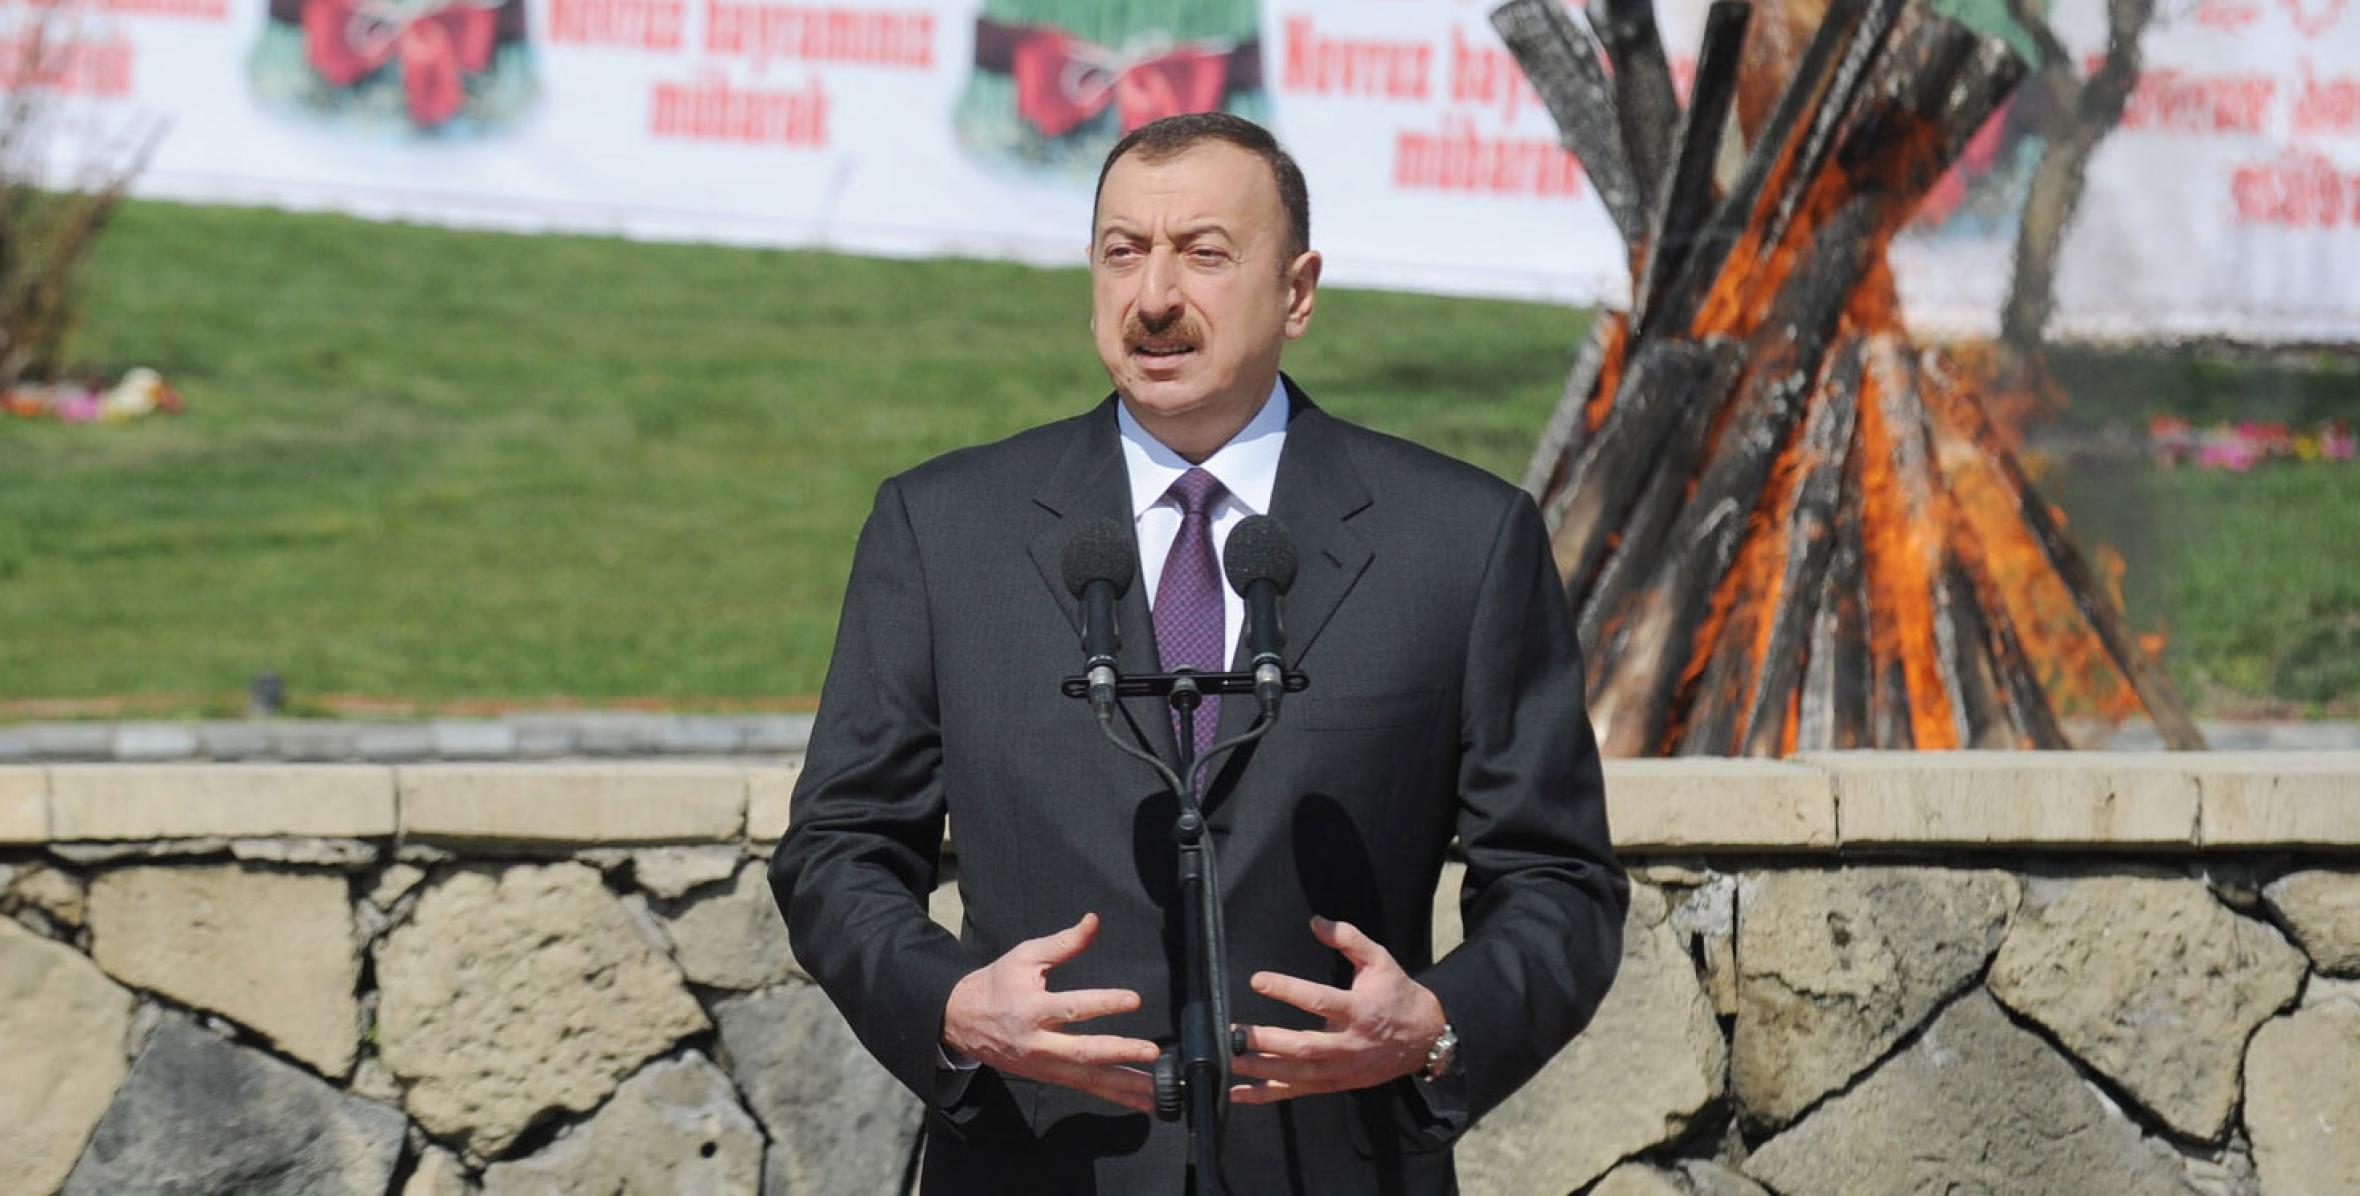 Speech by Ilham Aliyev at nationwide festivities on the occasion of Novruz holiday